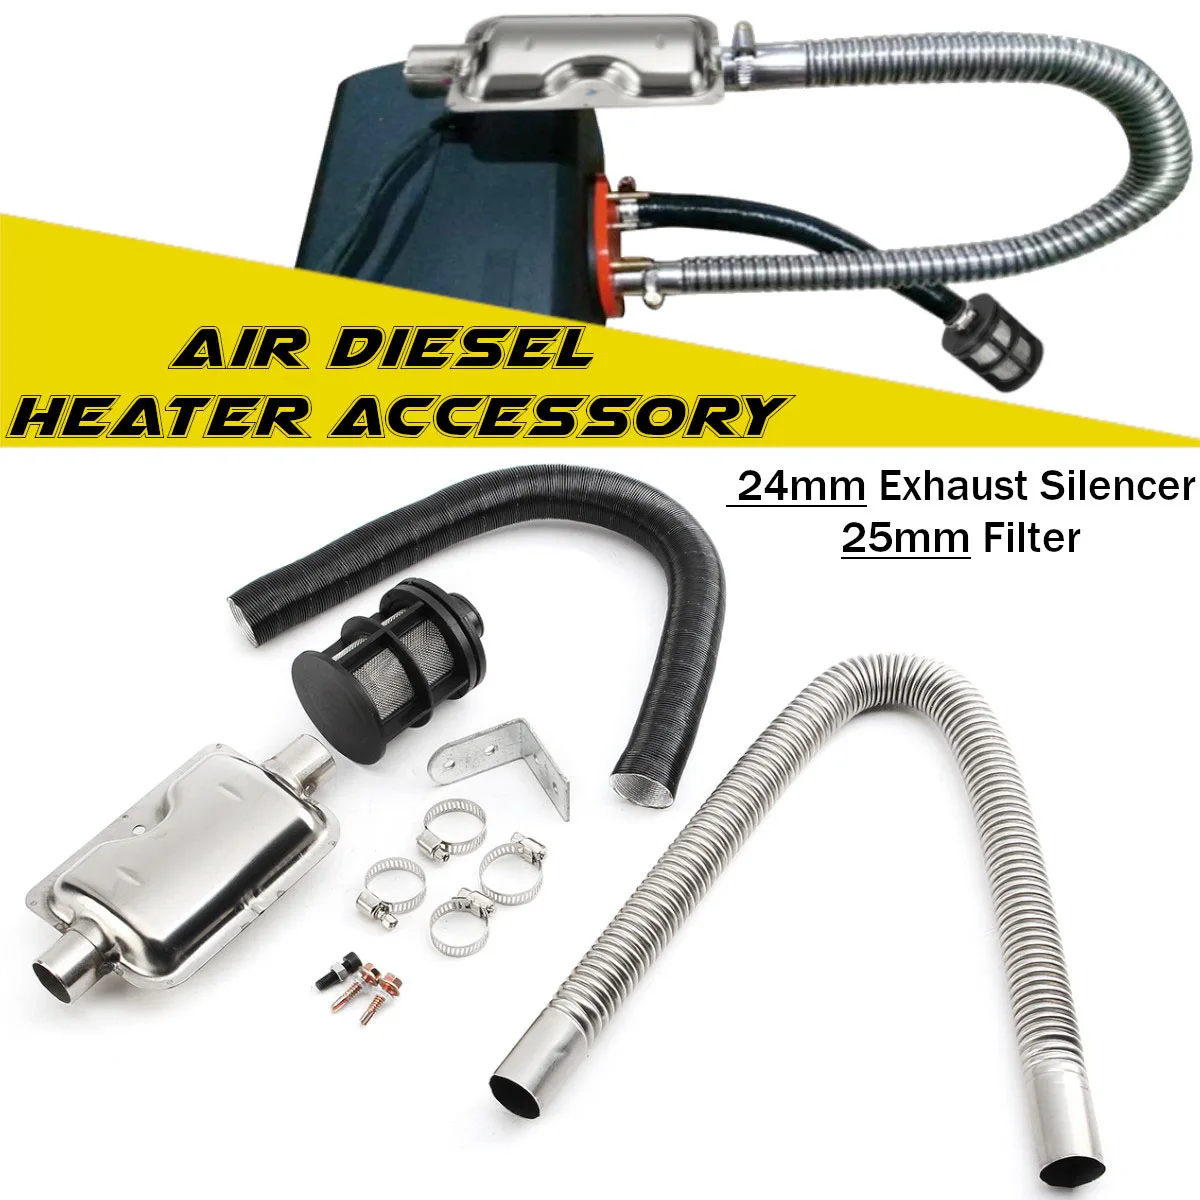 

Diesel-Parking Heater 24mm Exhaust-Silencer 25mm Filter Exhaust Air Intake Pipe Hose Line for Eberspacher